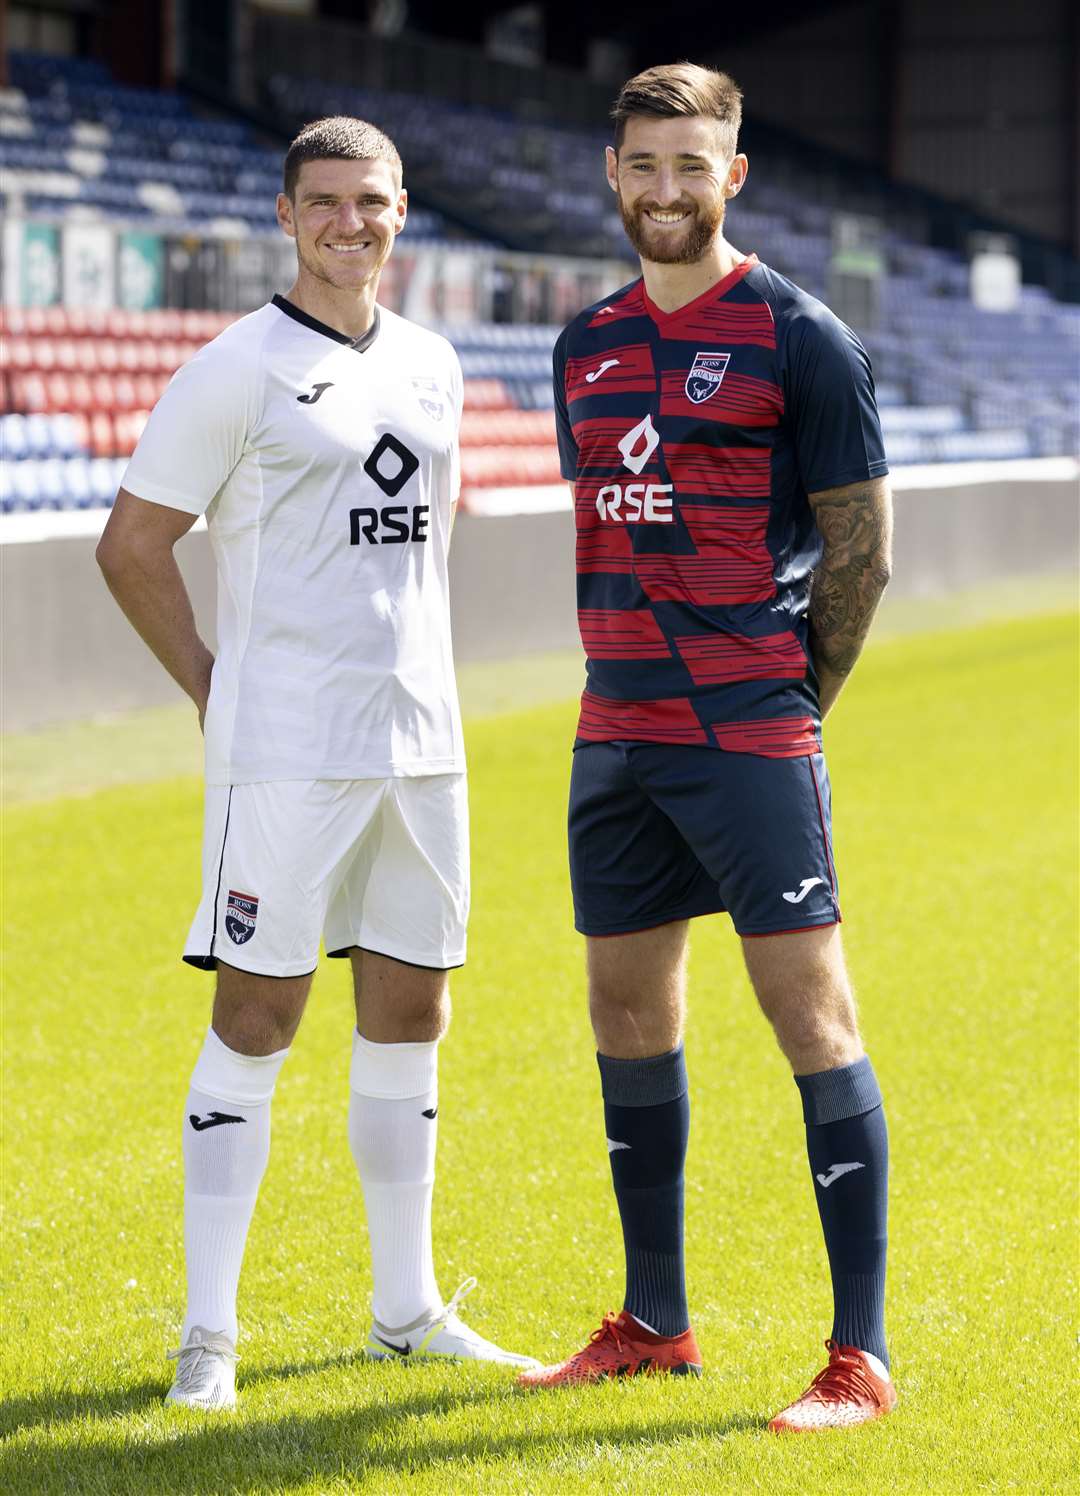 Picture - Ken Macpherson. See story. Ross County's Ross Callachan (left) and team captain Jack Baldwin yesterday (Thurs) modelled the new Ross County home and away kit for Season 2022-23. Callachan wears the away kit, and Baldwin the new home kit.